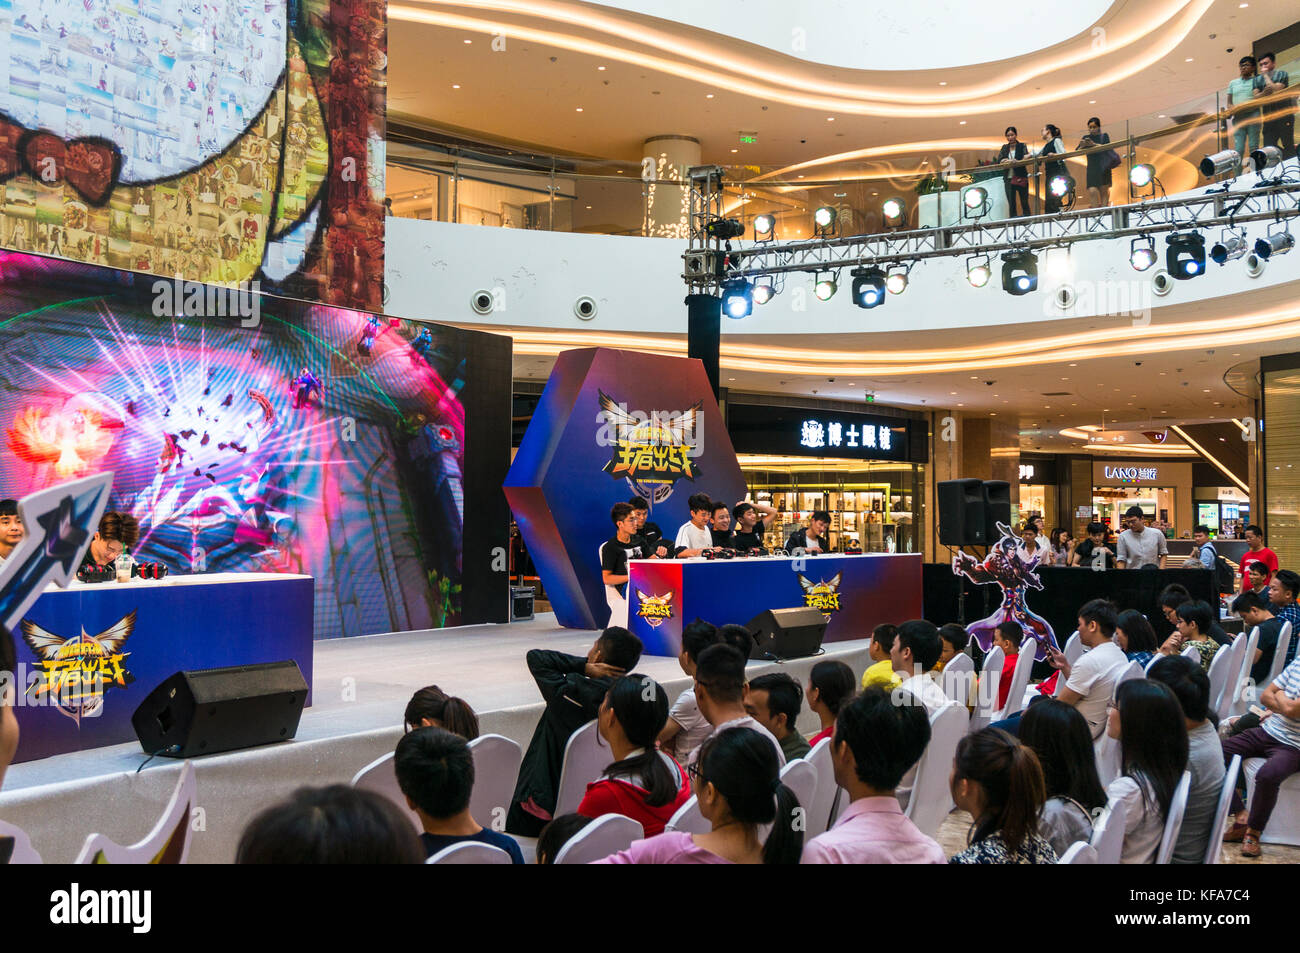 Kings Smackdown, a League of Legends style video game competition and audience in Shenzhen, China Stock Photo